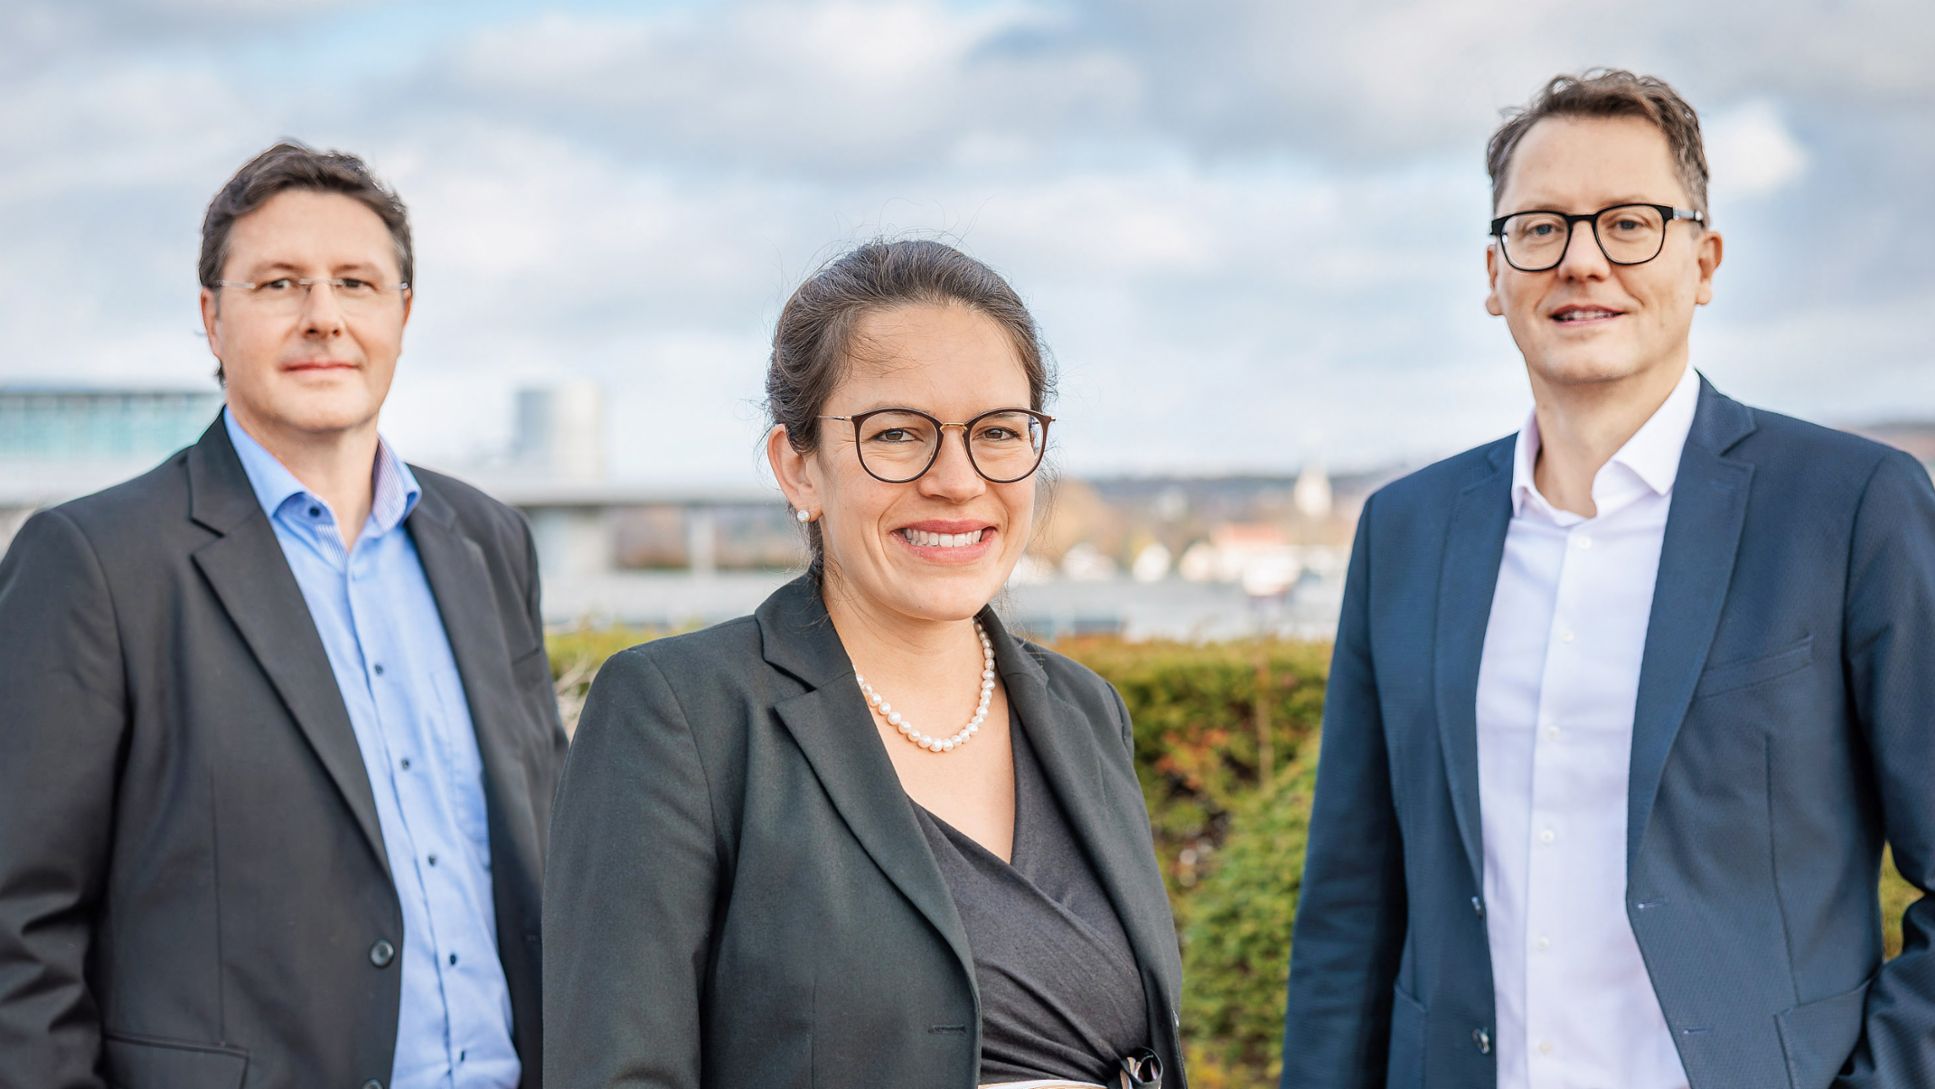 Vice President Lars Murawski (rechts), Annette Eckes (Senior Manager Circular Economy), Ingo Weiss (Head of Global Environment & Sustainability Management), 2023, Porsche Consulting